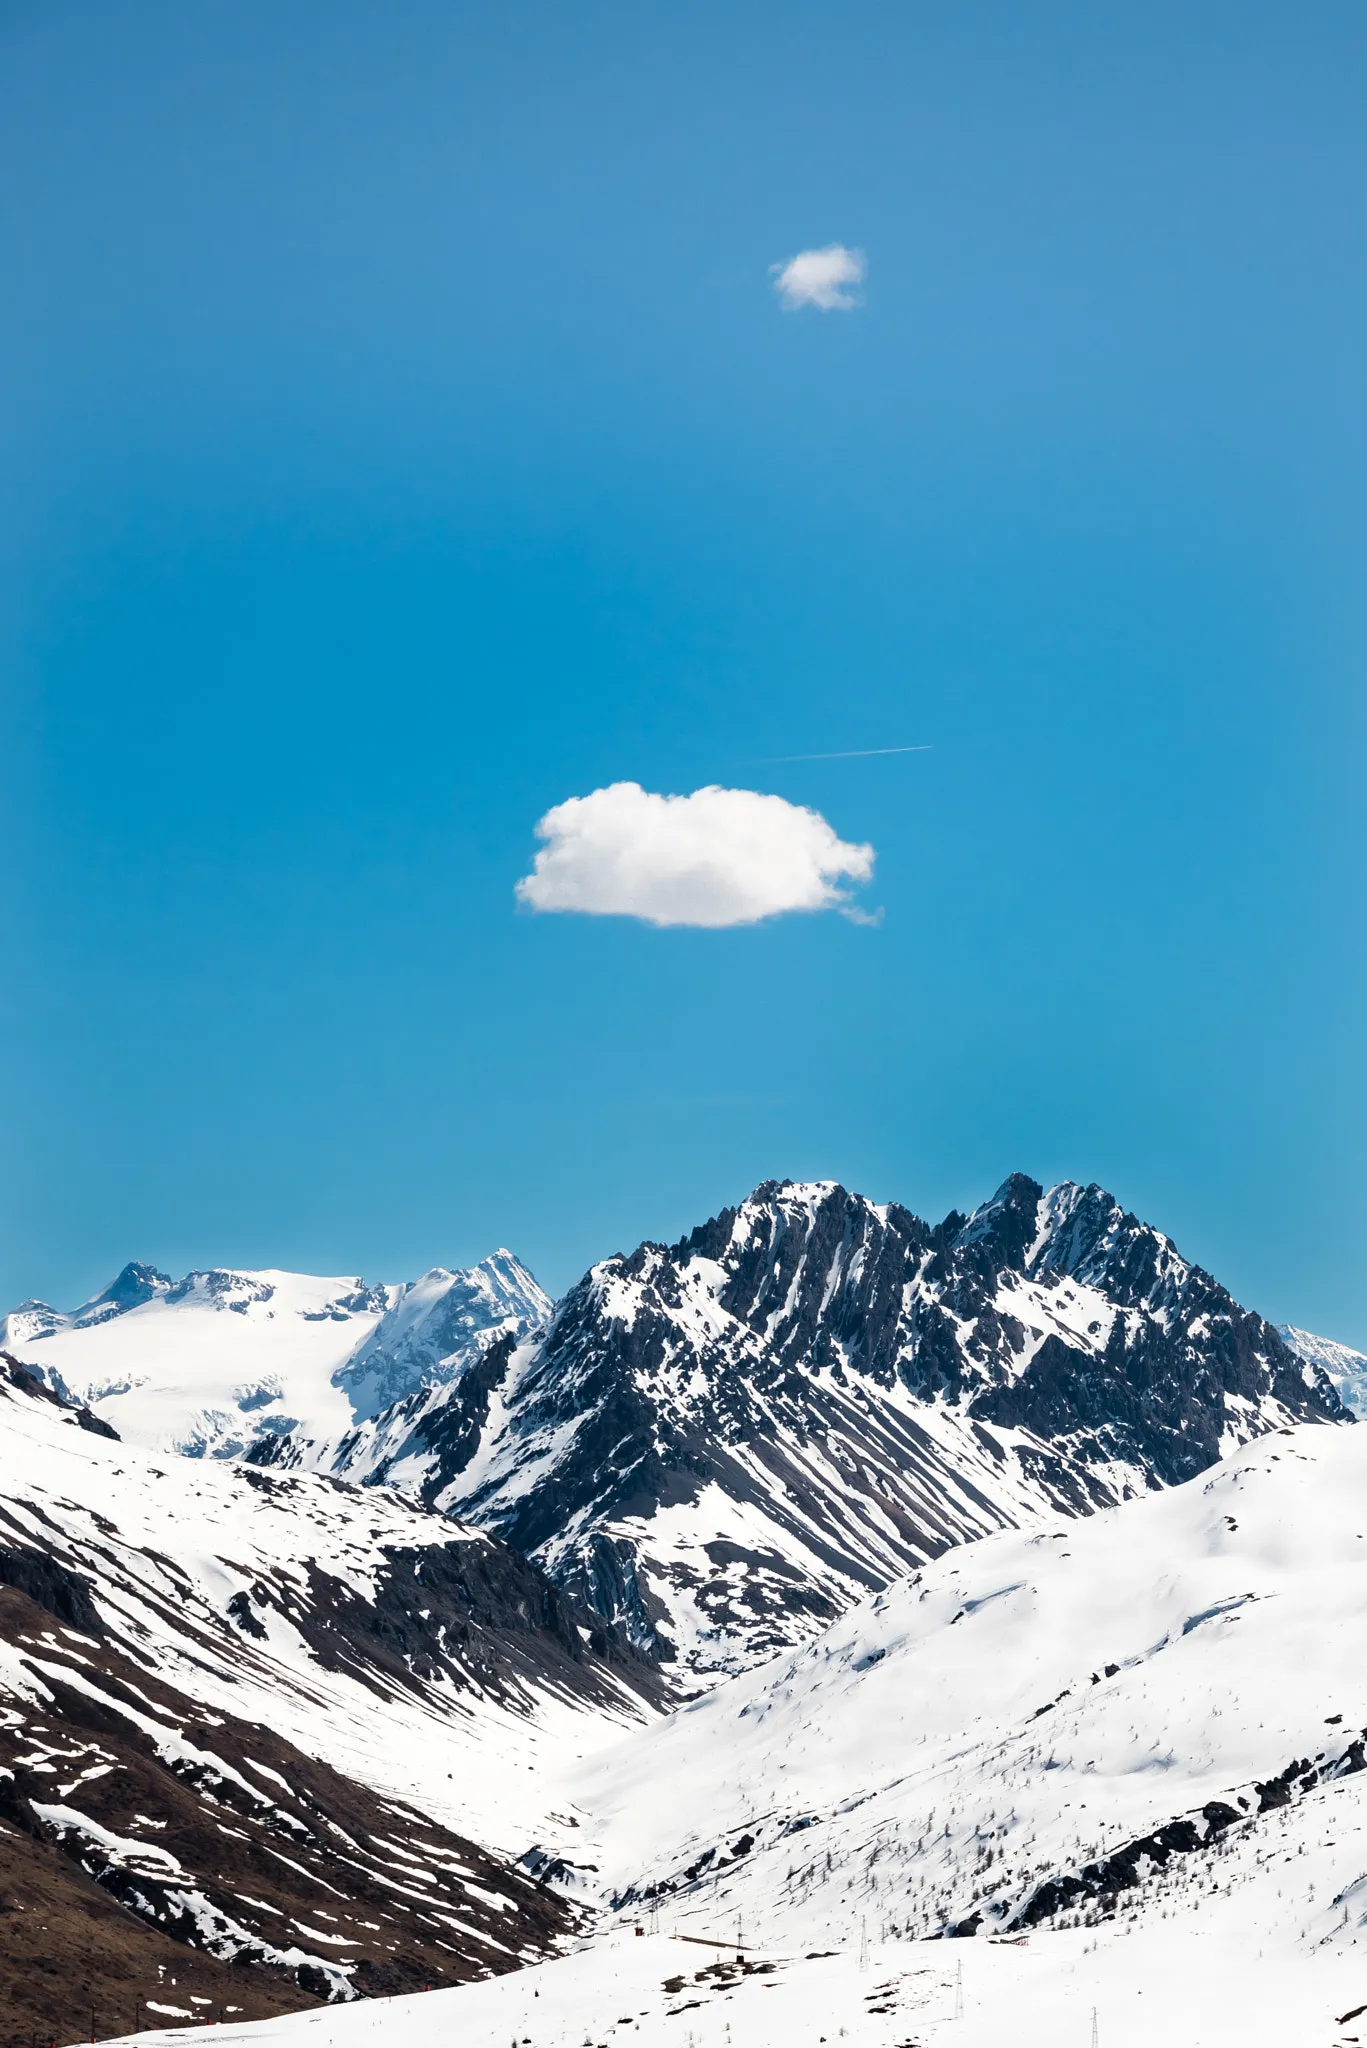 Photo showing: 500px provided description: If you use my image, please drop me a message to make me happy! :-) [#sky ,#clouds ,#italy ,#snow ,#mountain ,#alps ,#Livigno ,#Luca Florio]